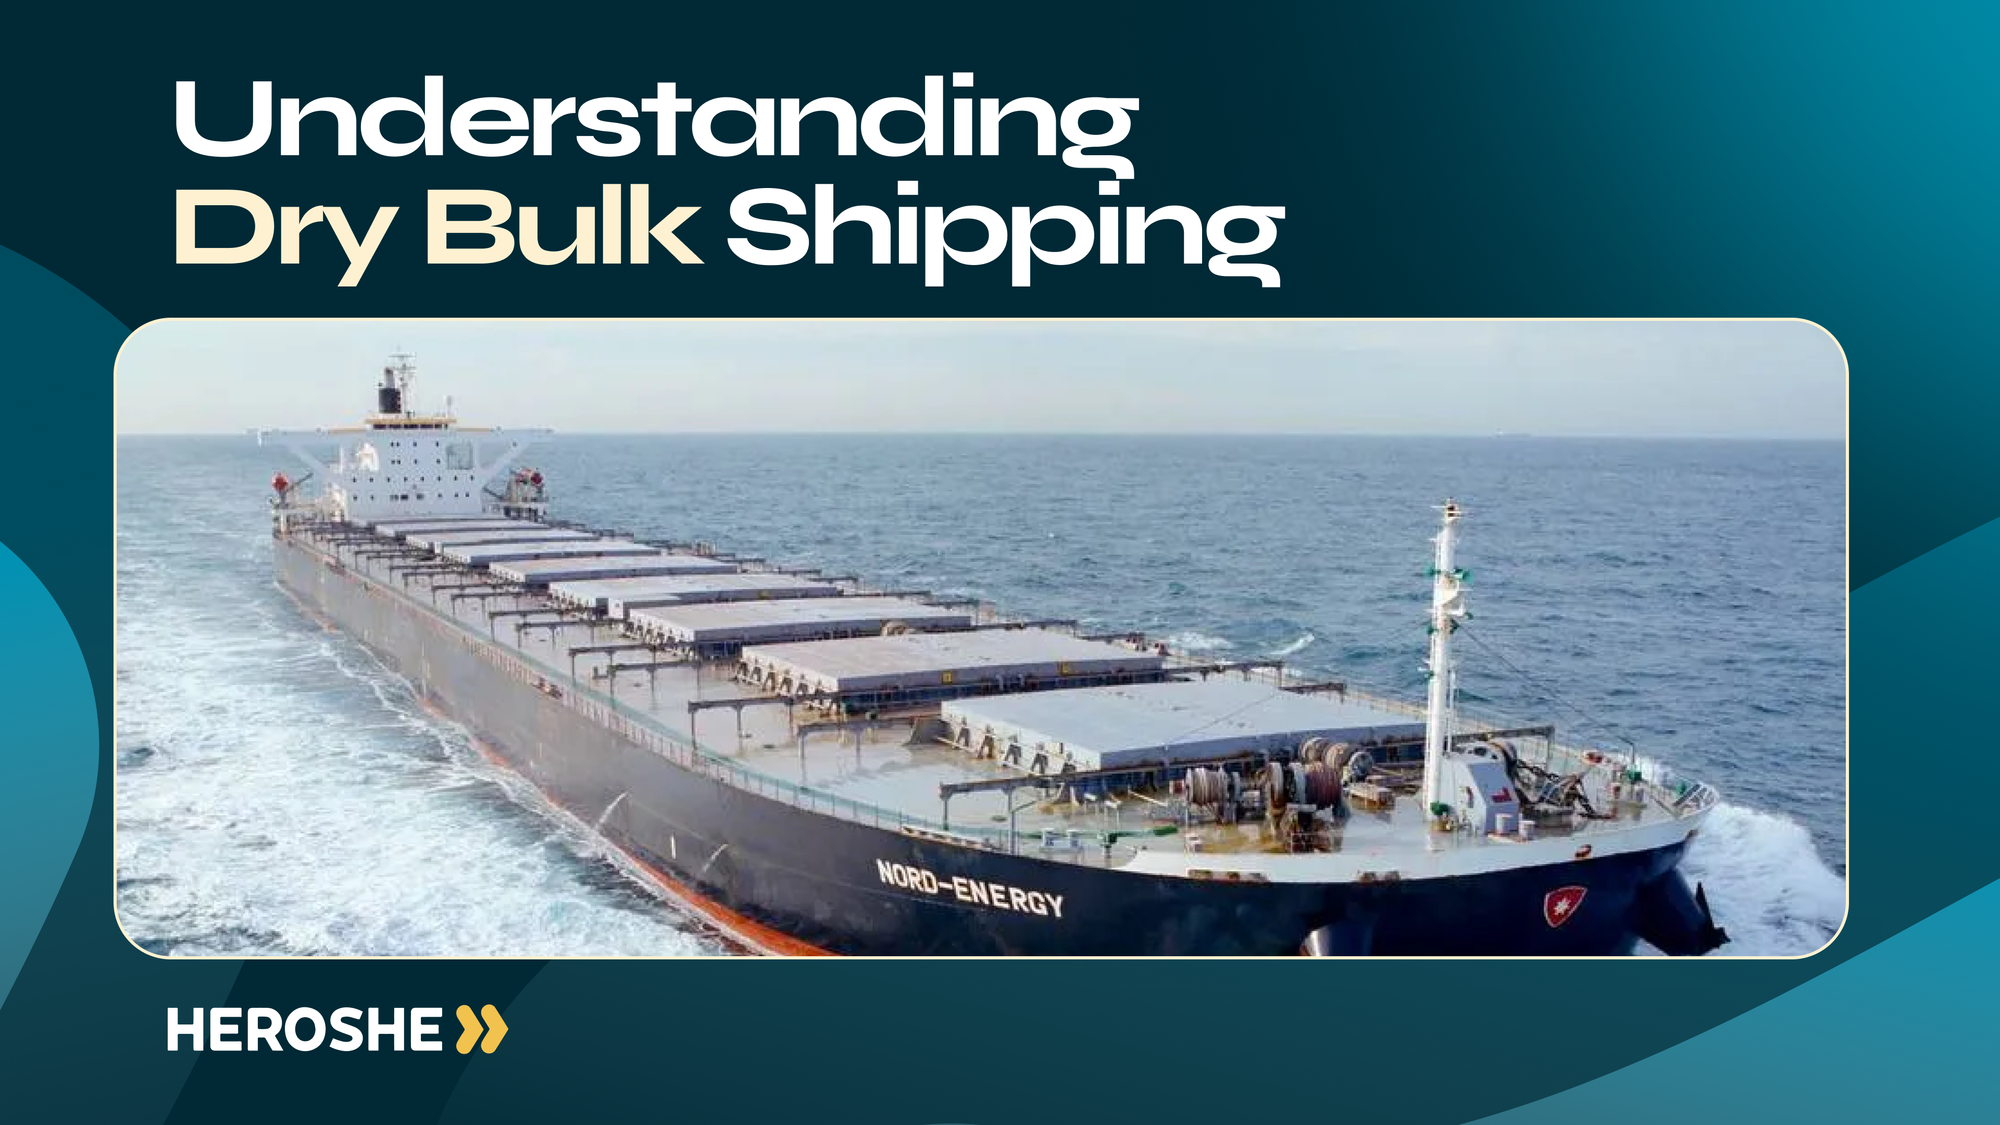 Everything You Need to Know About Dry Bulk Shipping